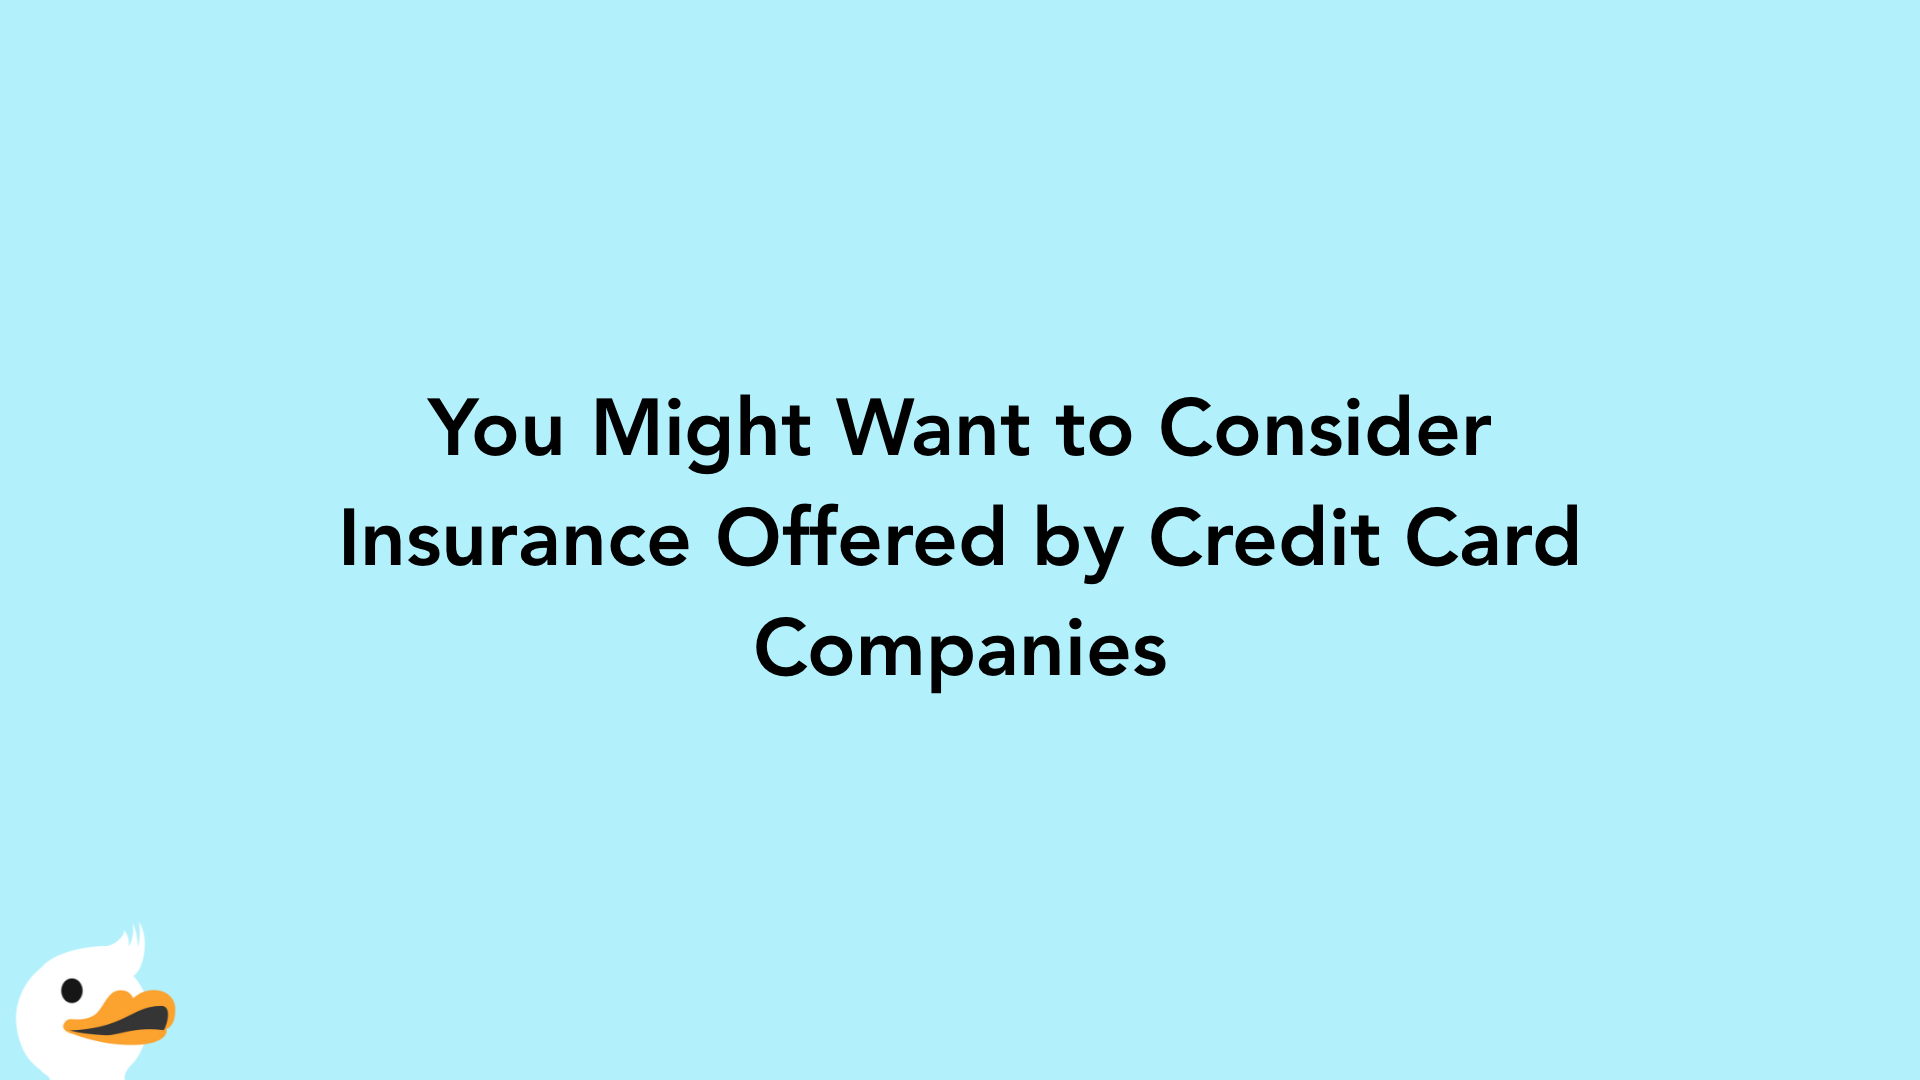 You Might Want to Consider Insurance Offered by Credit Card Companies